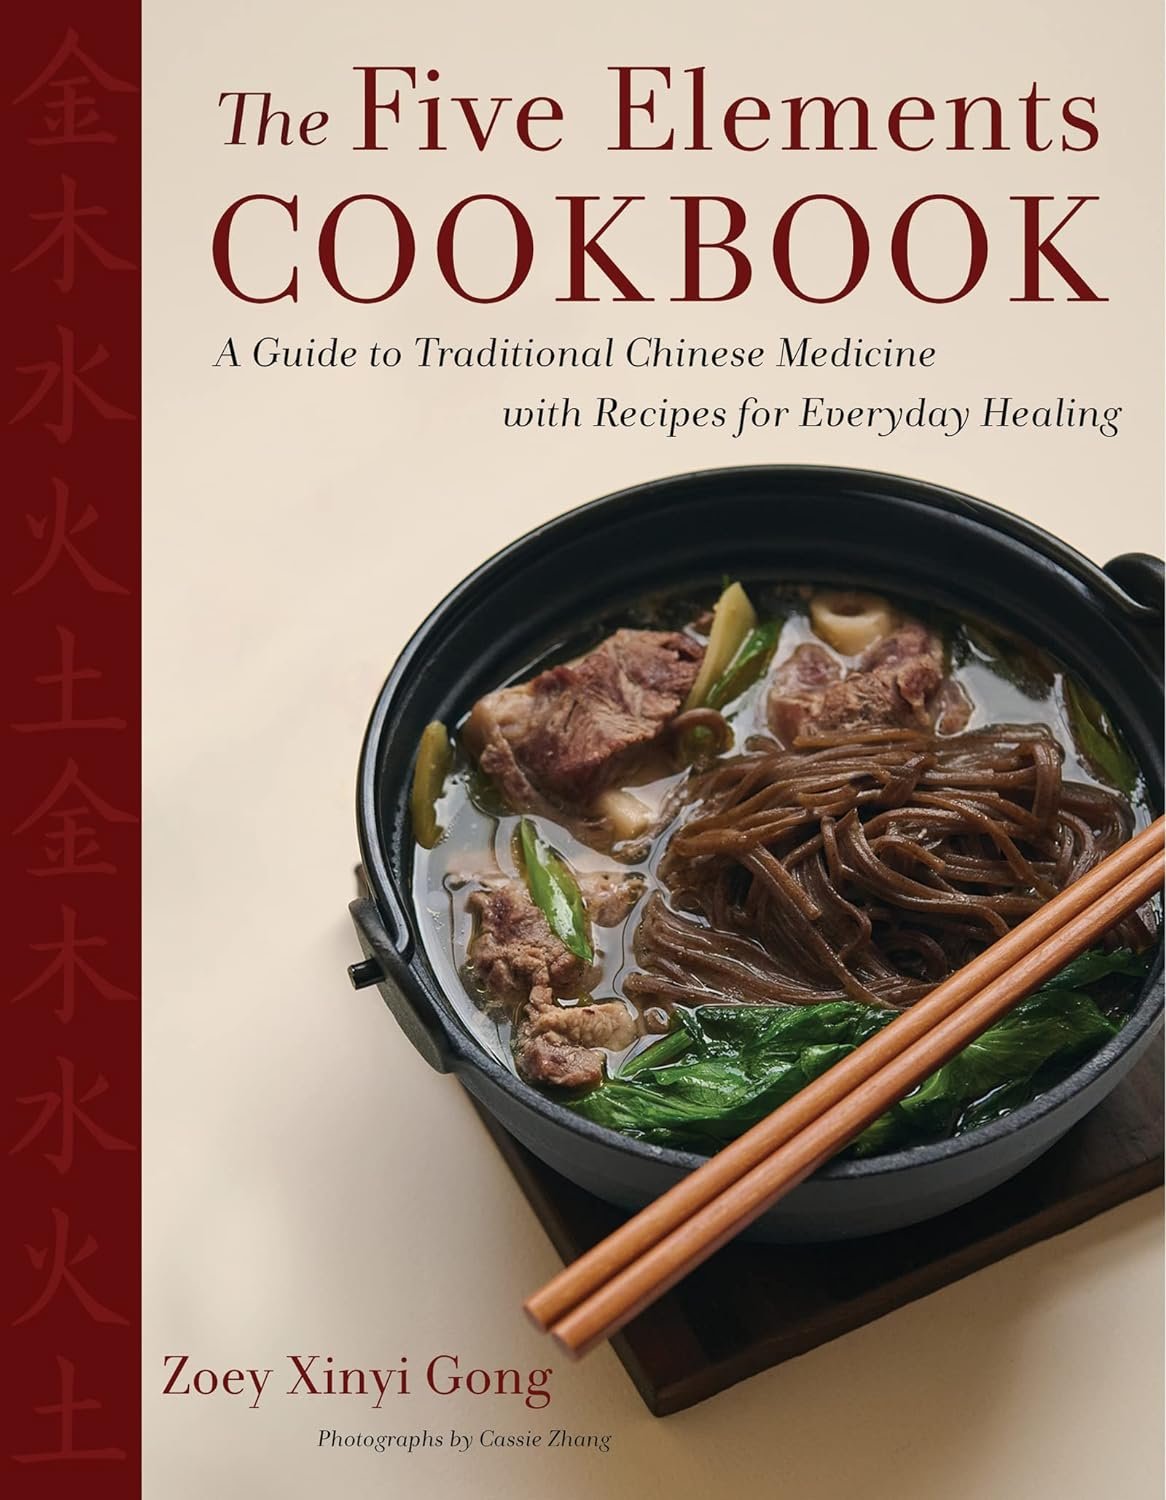 The Five Elements Cookbook by Zoey Xinyi Gong.jpg